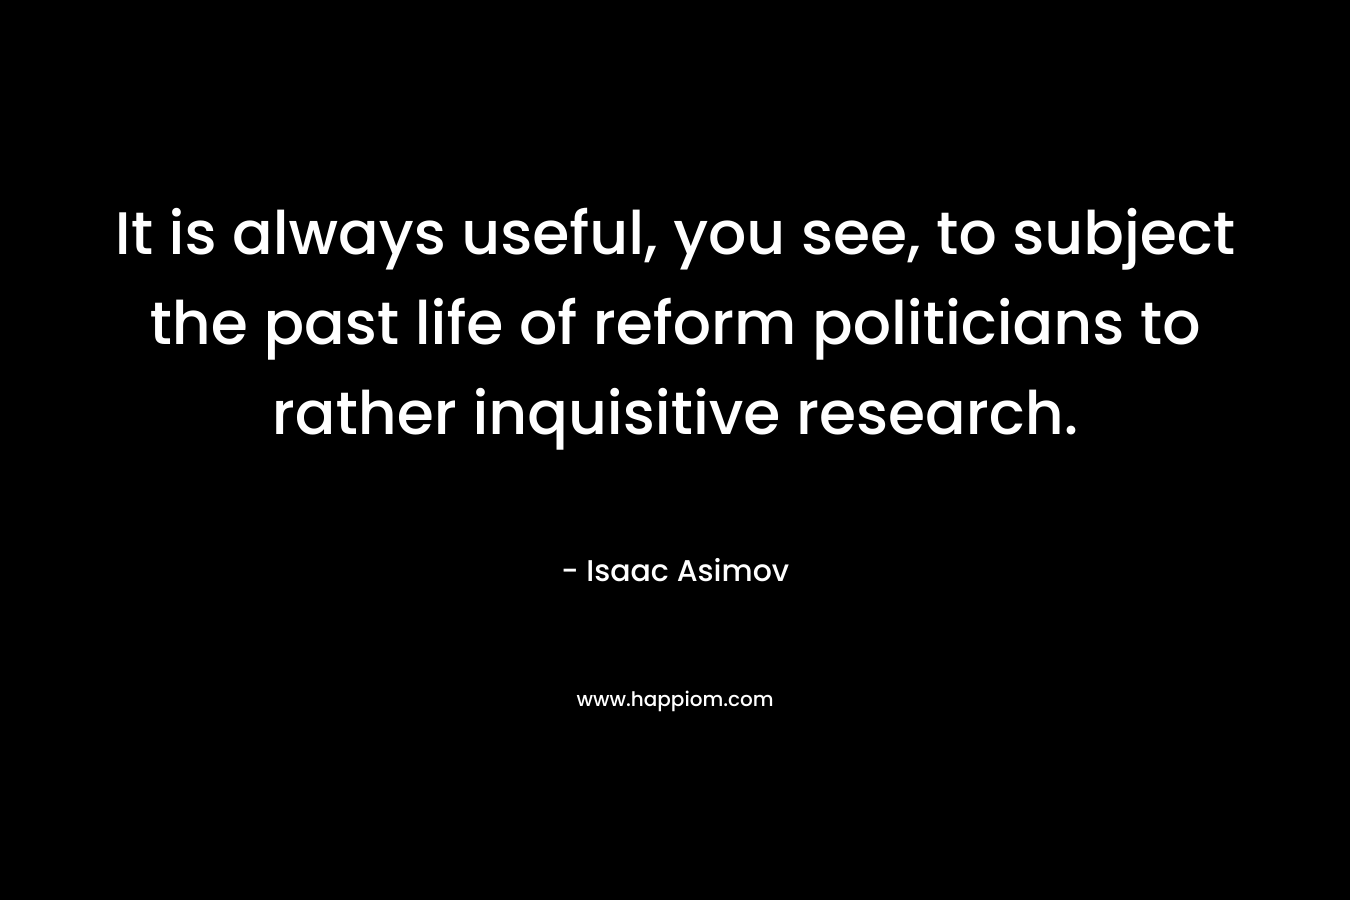 It is always useful, you see, to subject the past life of reform politicians to rather inquisitive research. – Isaac Asimov